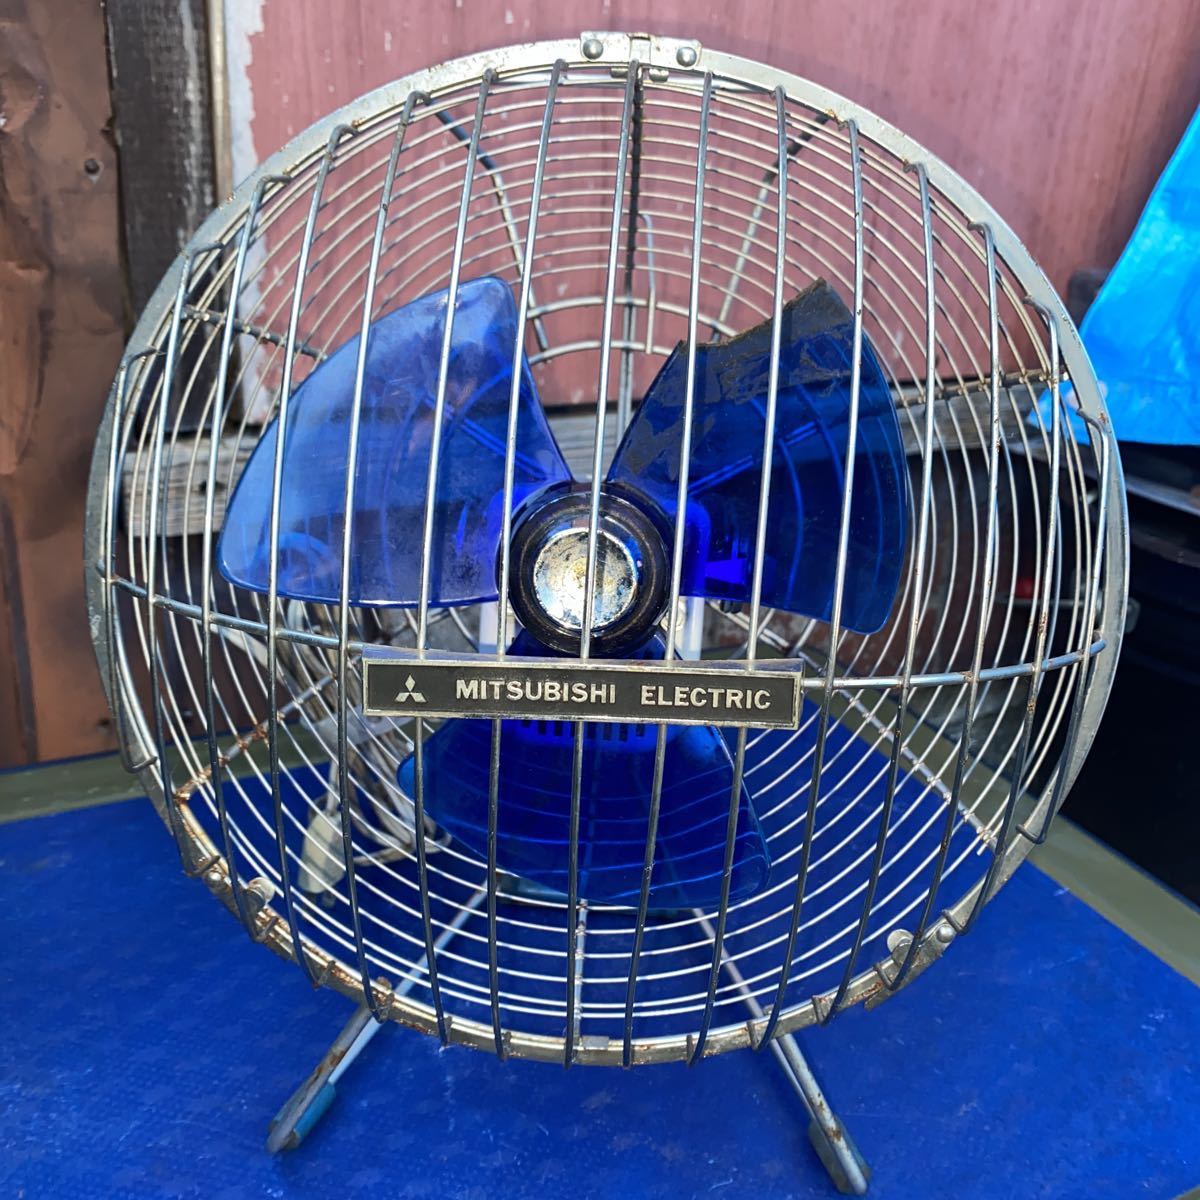 Electric fan   Consumer electronics   Antique and collection   bidJDM